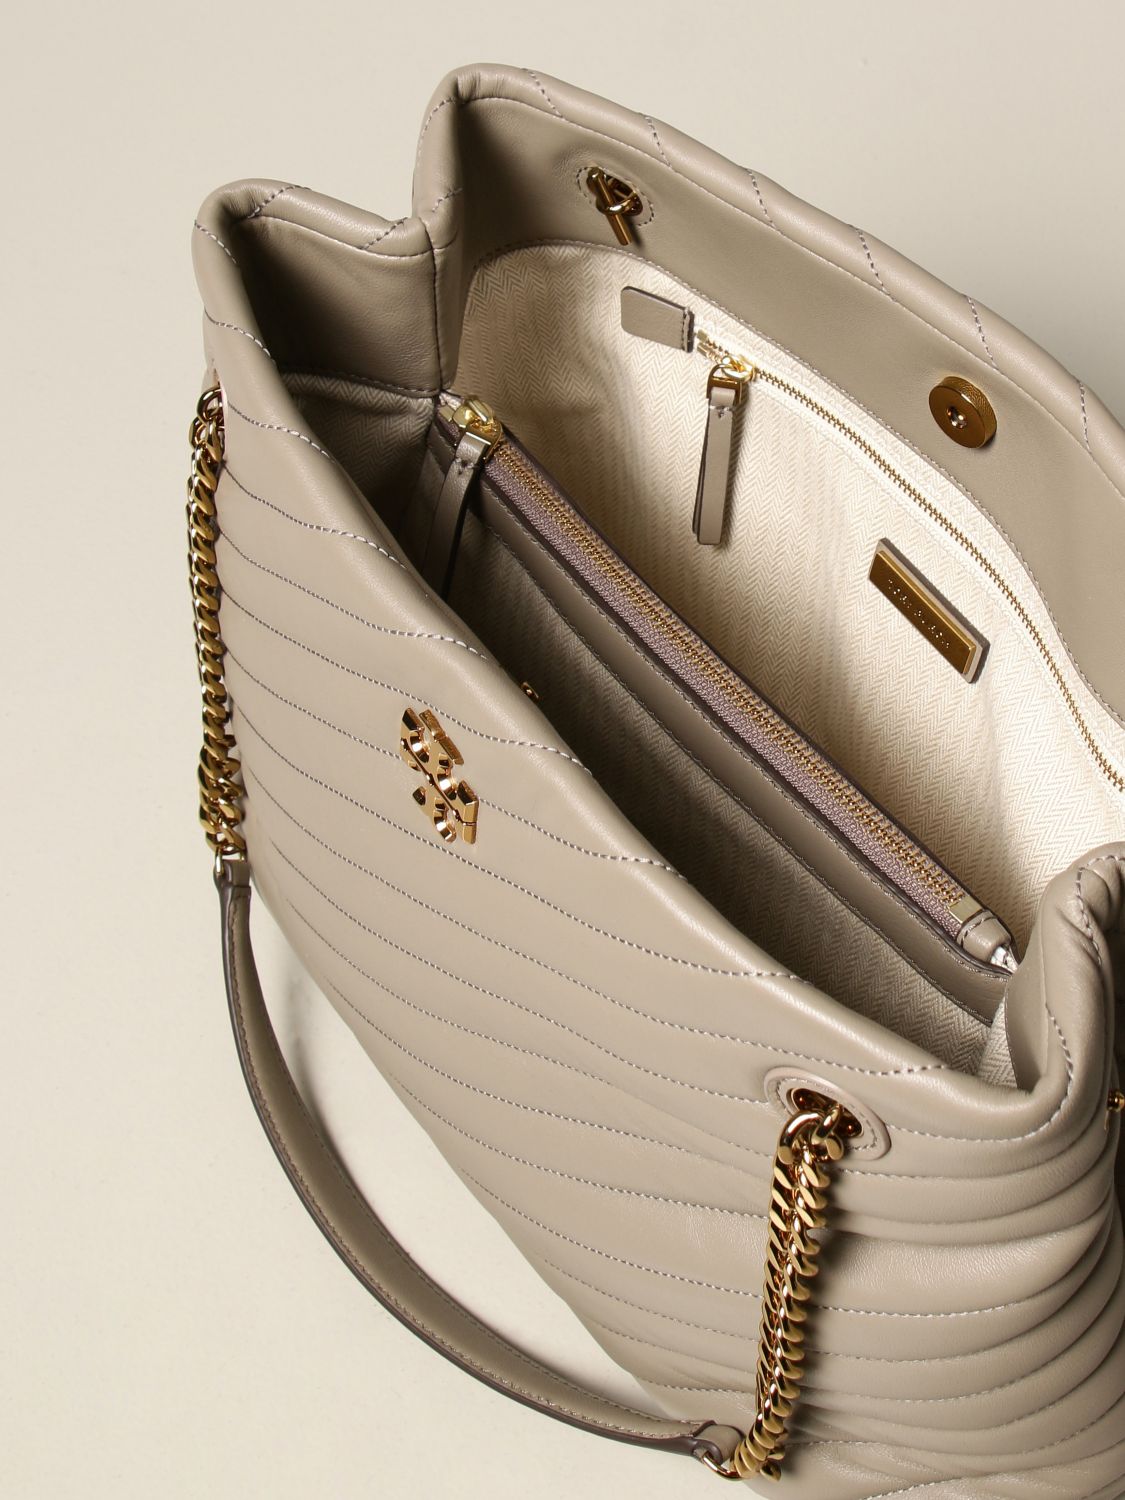 TORY BURCH: Kira bag in quilted leather - Grey Burch tote bags 56757 online GIGLIO.COM